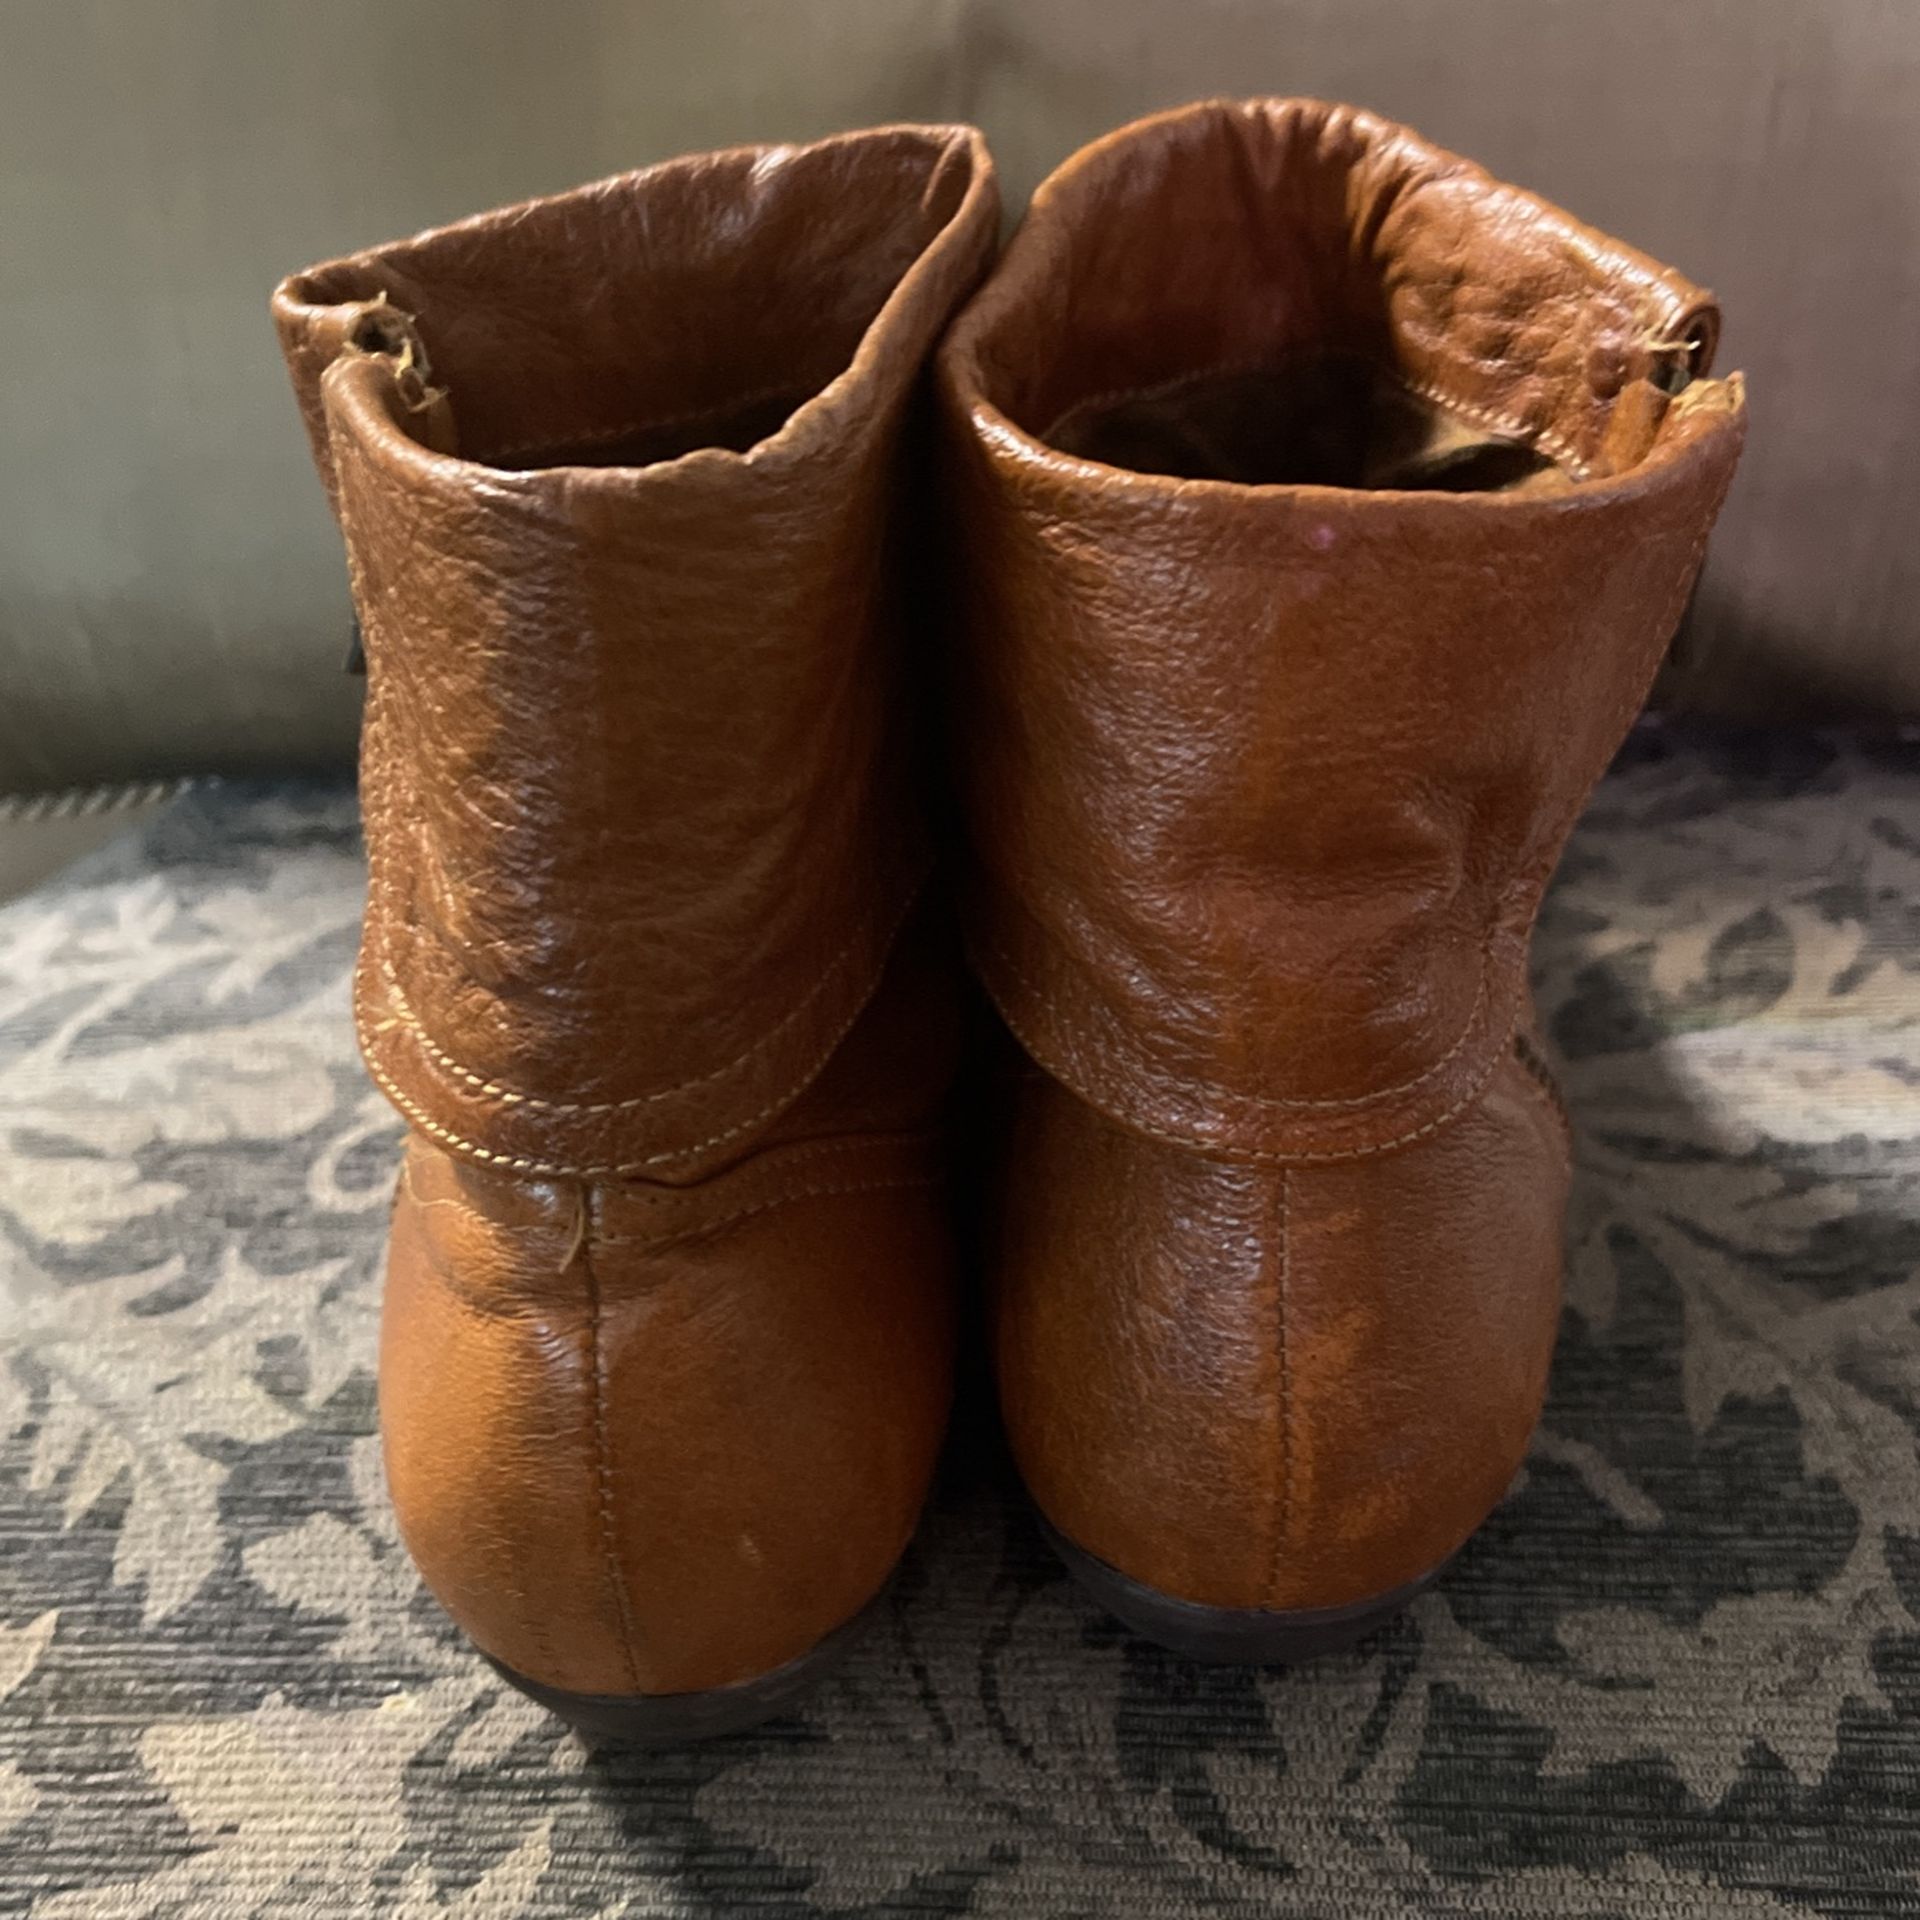 Chinese Laundry Leather Boots